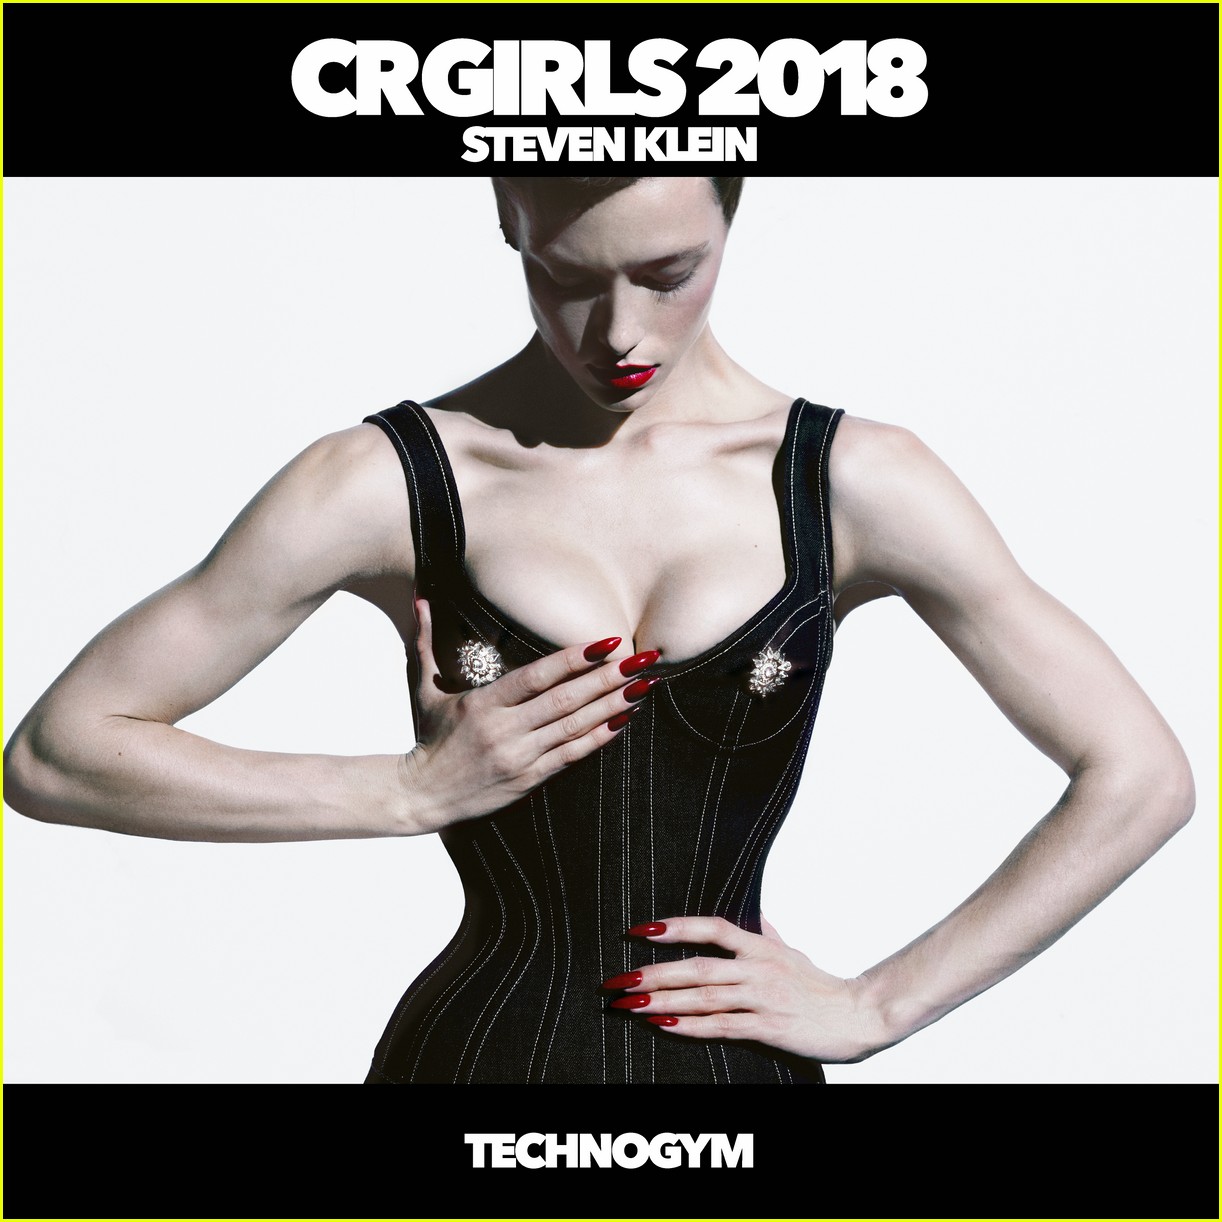 CR Girls 2018 with Technogym Cover